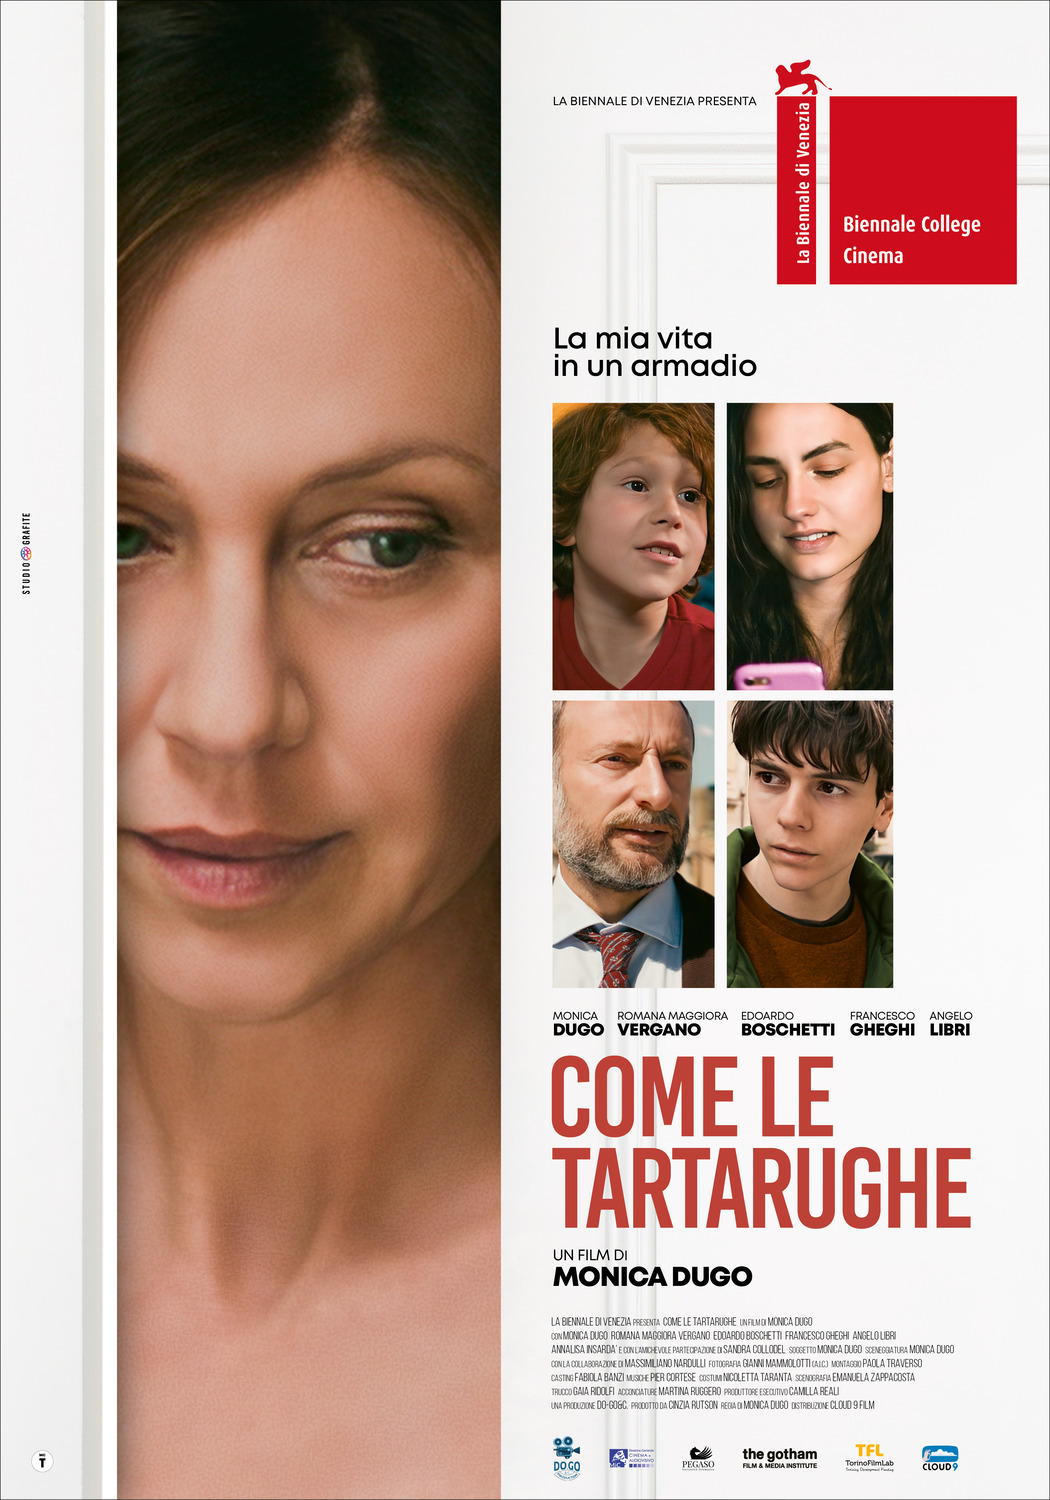 Extra Large Movie Poster Image for Come le tartarughe 